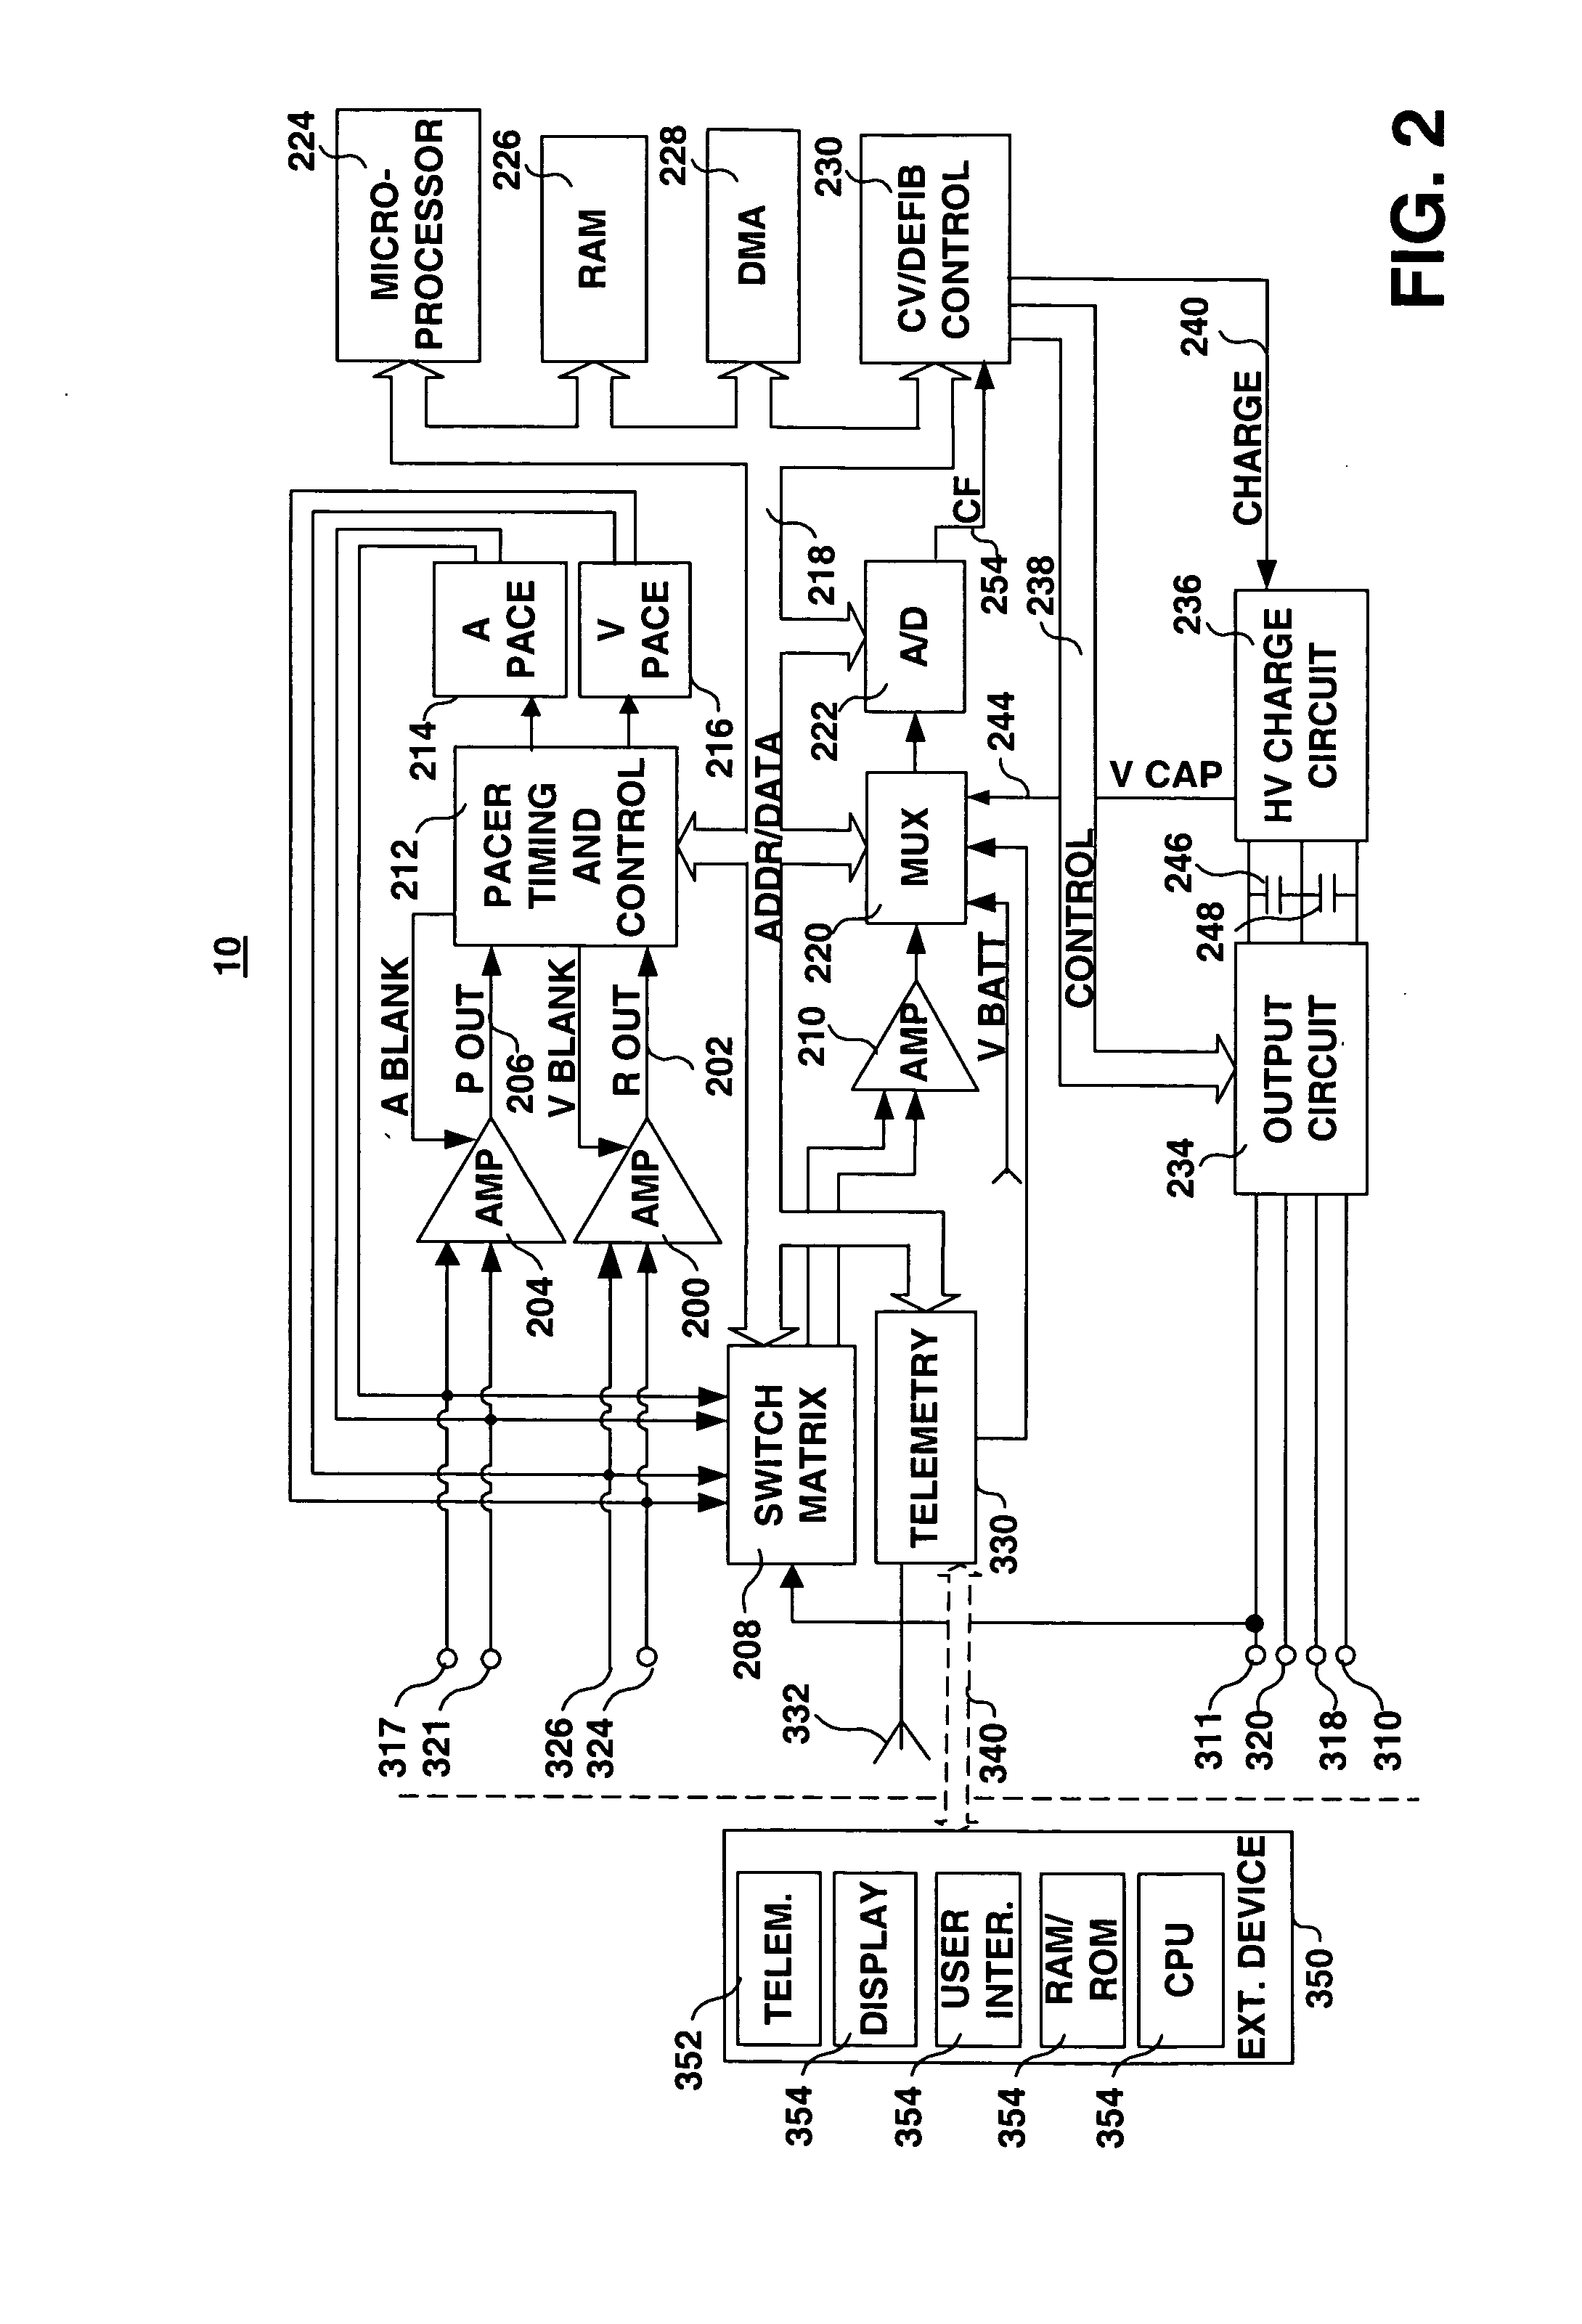 Method and apparatus for generating a template for arrhythmia detection and electrogram morphology classification